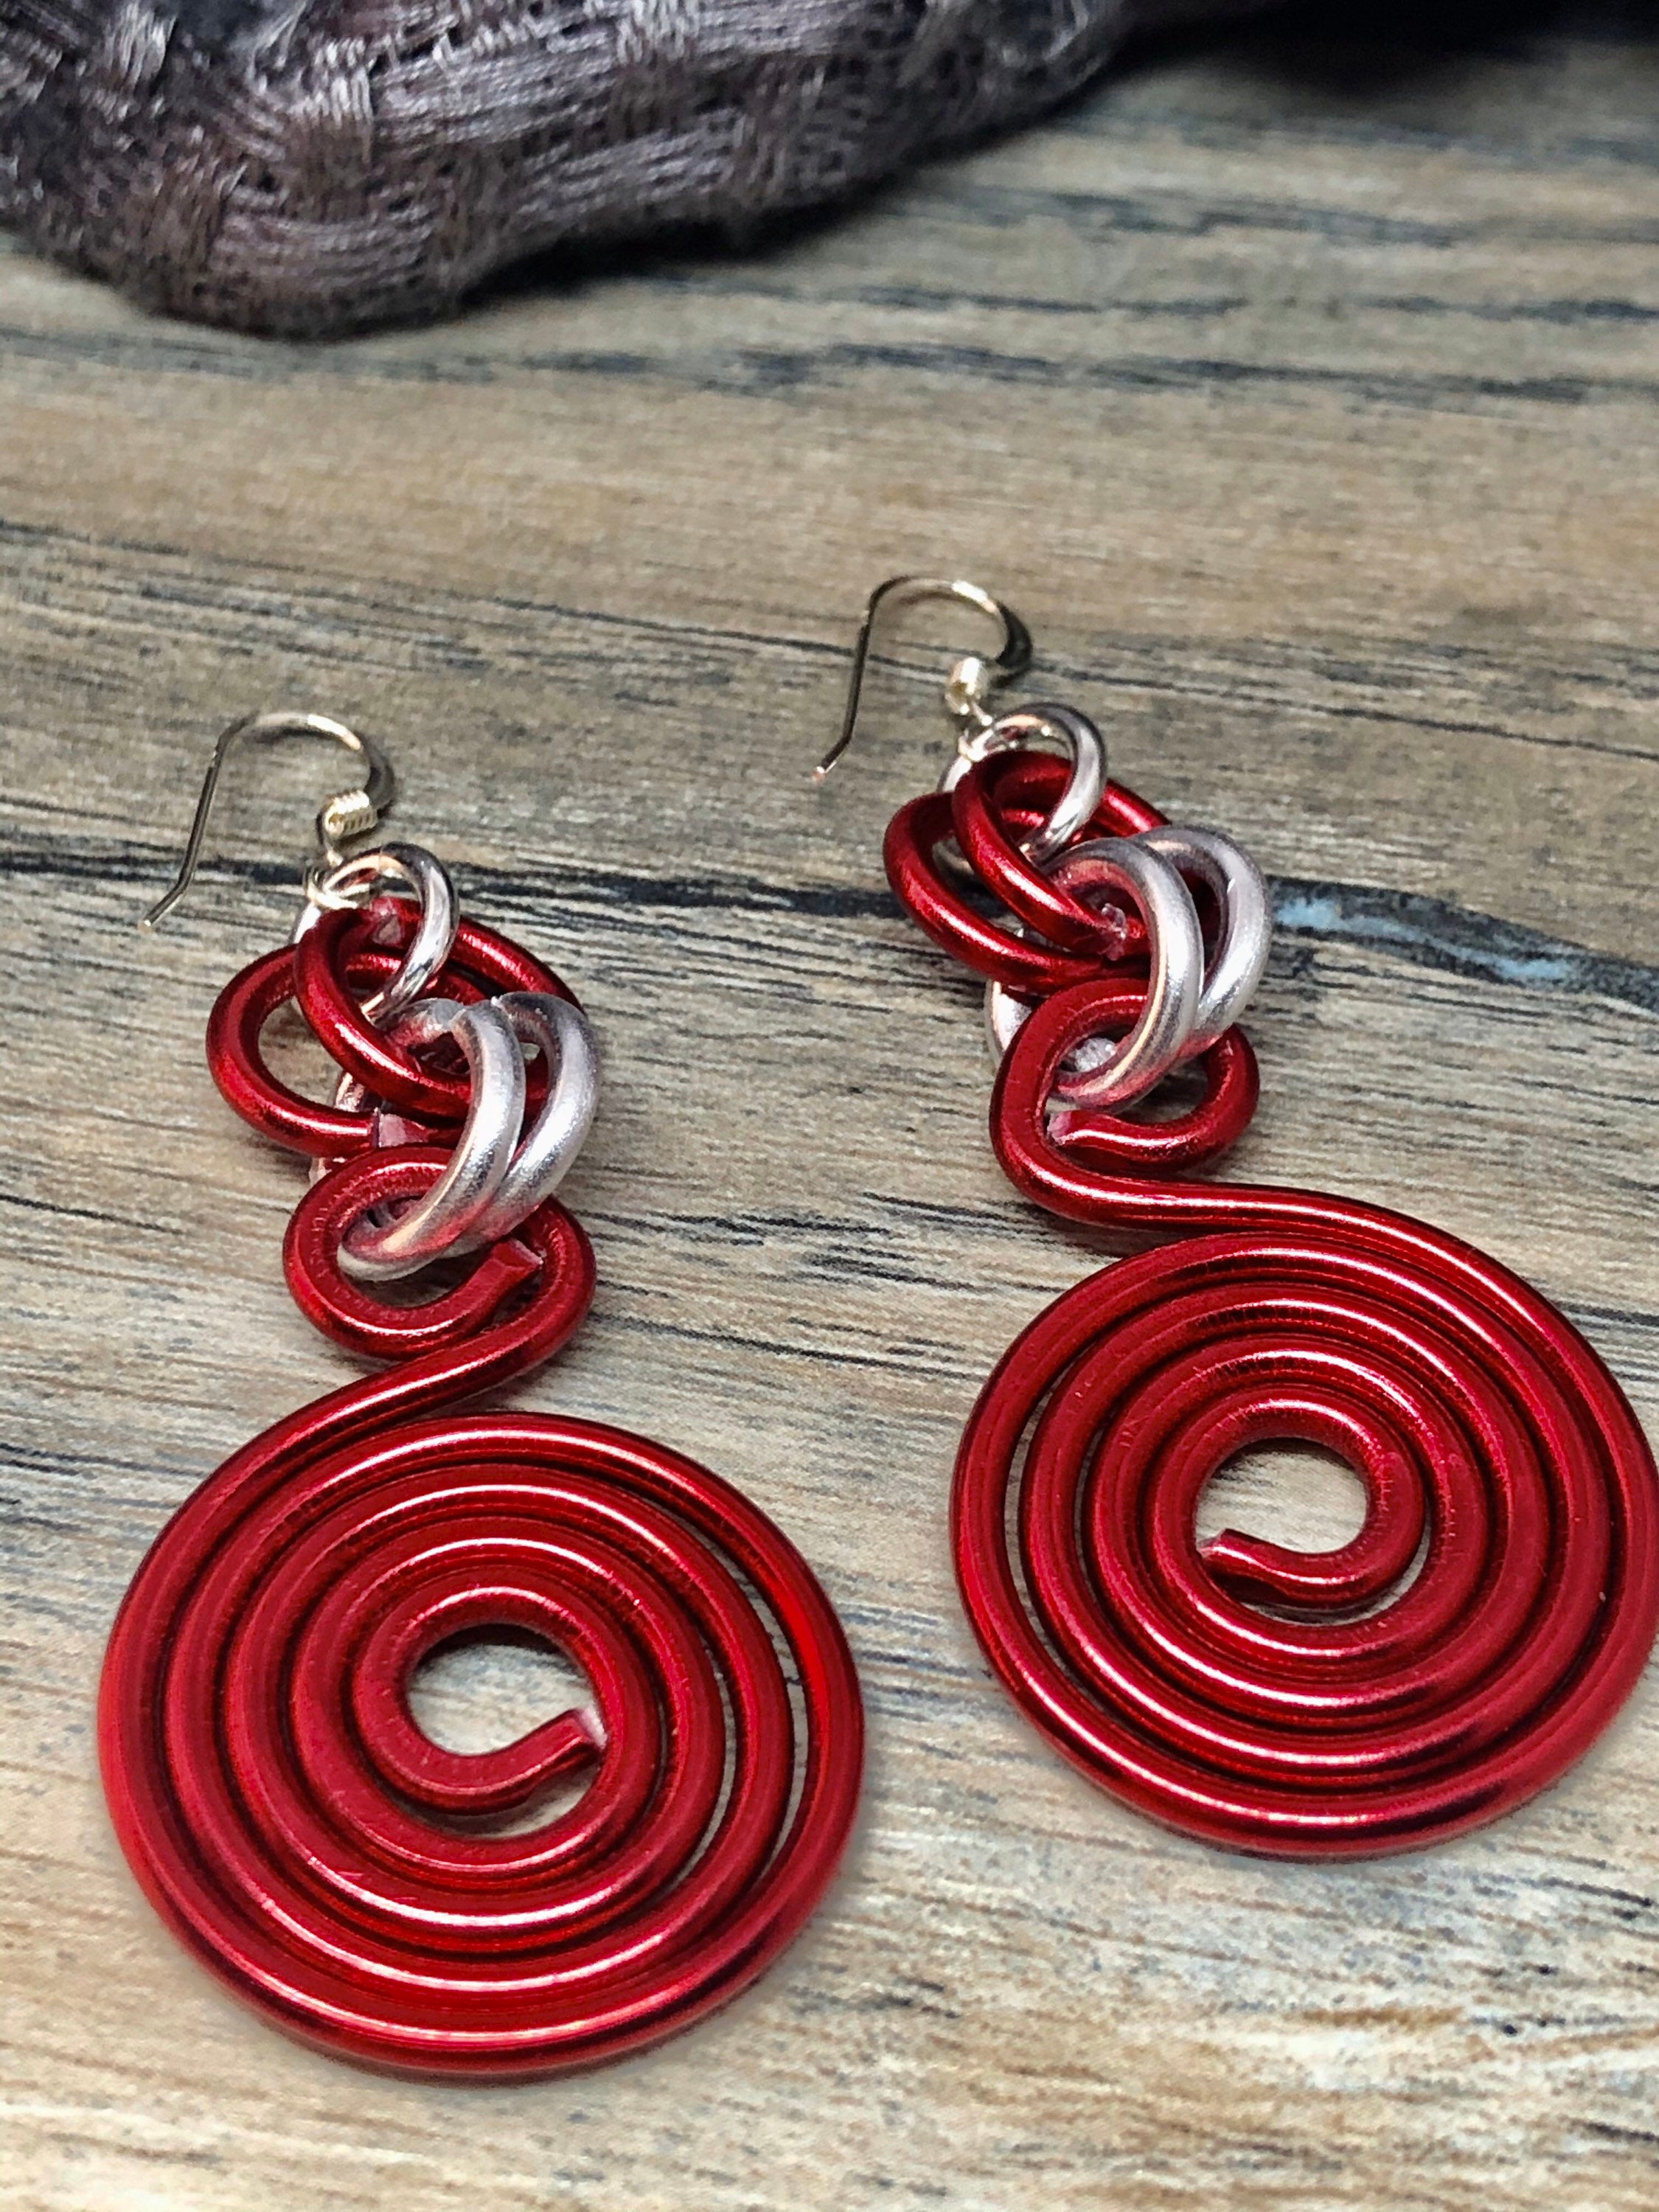 Round Red Earrings, light weight aluminum wire with sterling silver ear wire